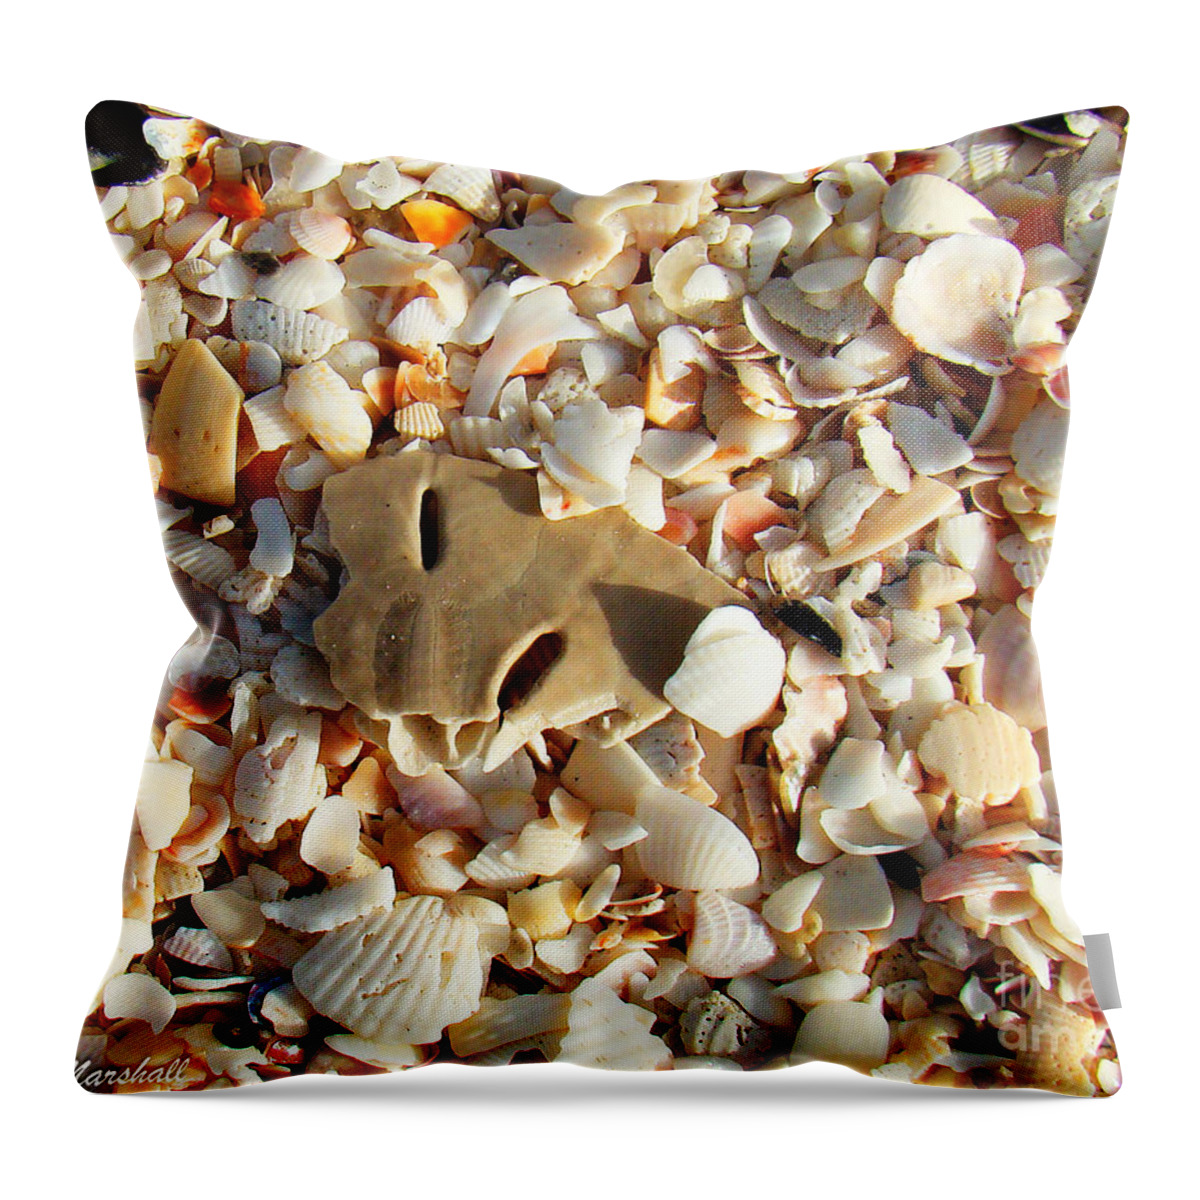 Shells Throw Pillow featuring the photograph Broken Beach Treasures by Nancy L Marshall